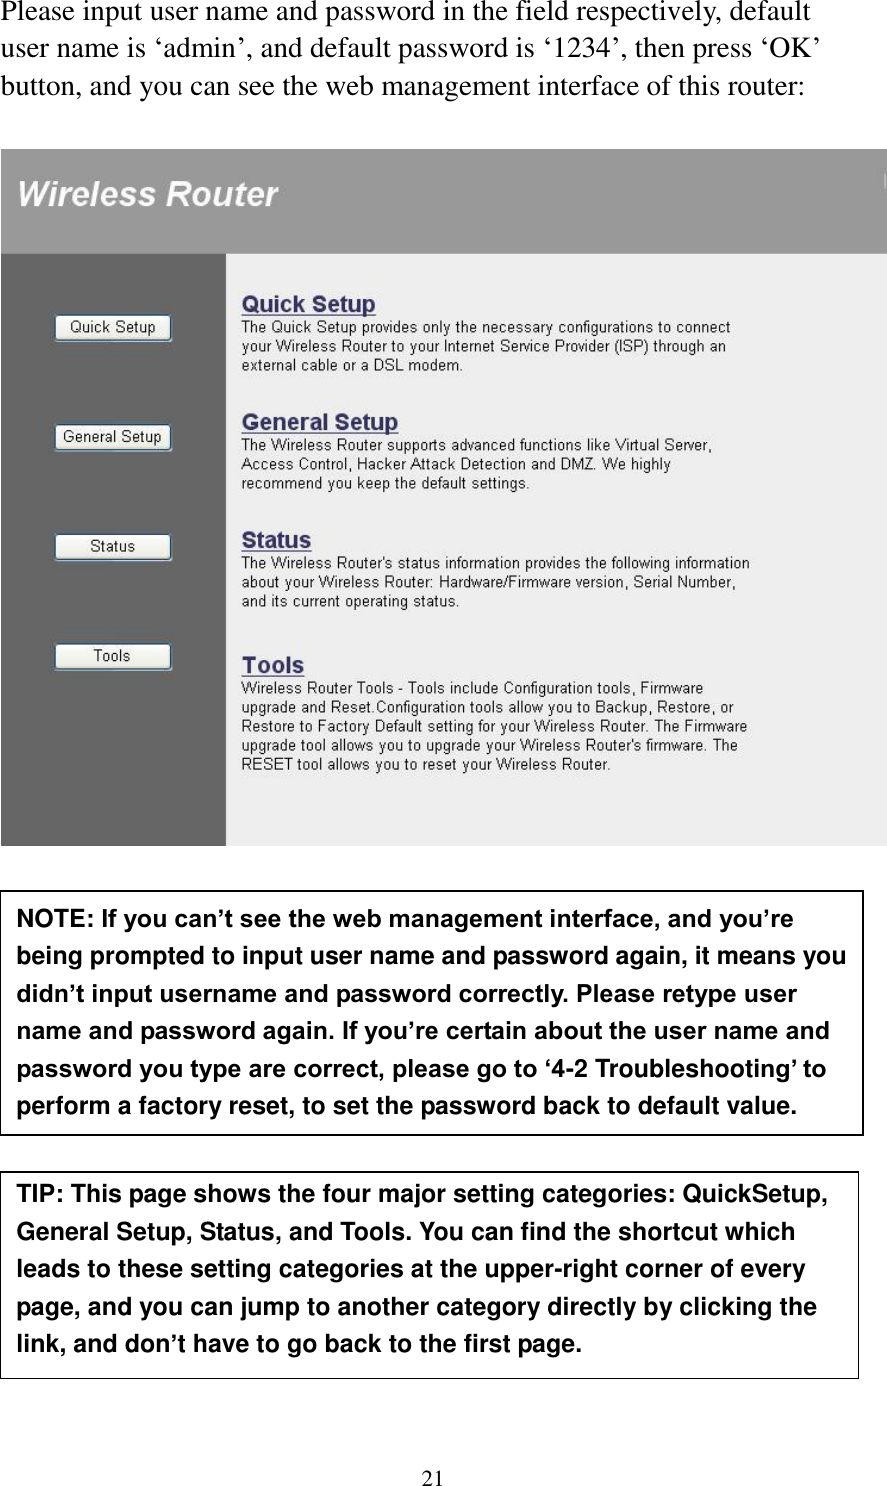 21 Please input user name and password in the field respectively, default user name is ‘admin’, and default password is ‘1234’, then press ‘OK’ button, and you can see the web management interface of this router:             NOTE: If you can’t see the web management interface, and you’re being prompted to input user name and password again, it means you didn’t input username and password correctly. Please retype user name and password again. If you’re certain about the user name and password you type are correct, please go to ‘4-2 Troubleshooting’ to perform a factory reset, to set the password back to default value.  TIP: This page shows the four major setting categories: QuickSetup, General Setup, Status, and Tools. You can find the shortcut which leads to these setting categories at the upper-right corner of every page, and you can jump to another category directly by clicking the link, and don’t have to go back to the first page.  